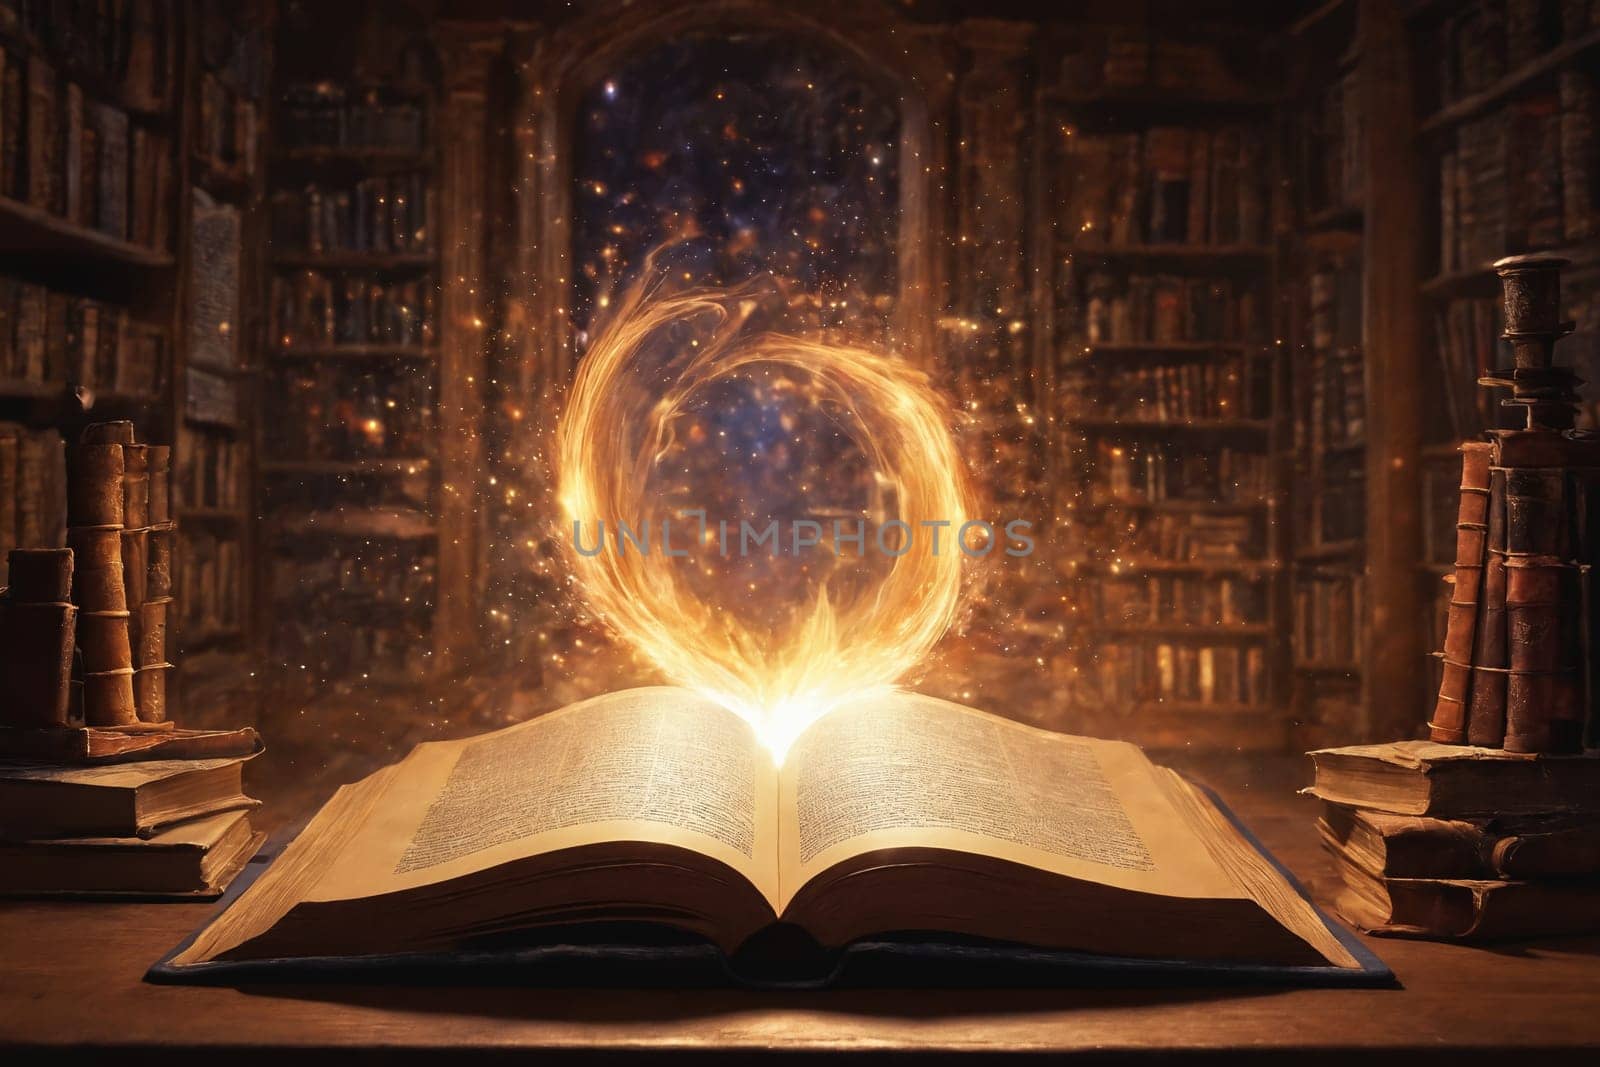 Depicting a magical book radiating an enchanting flame. Ideal visual metaphor for a thrilling, action-packed fantasy story.